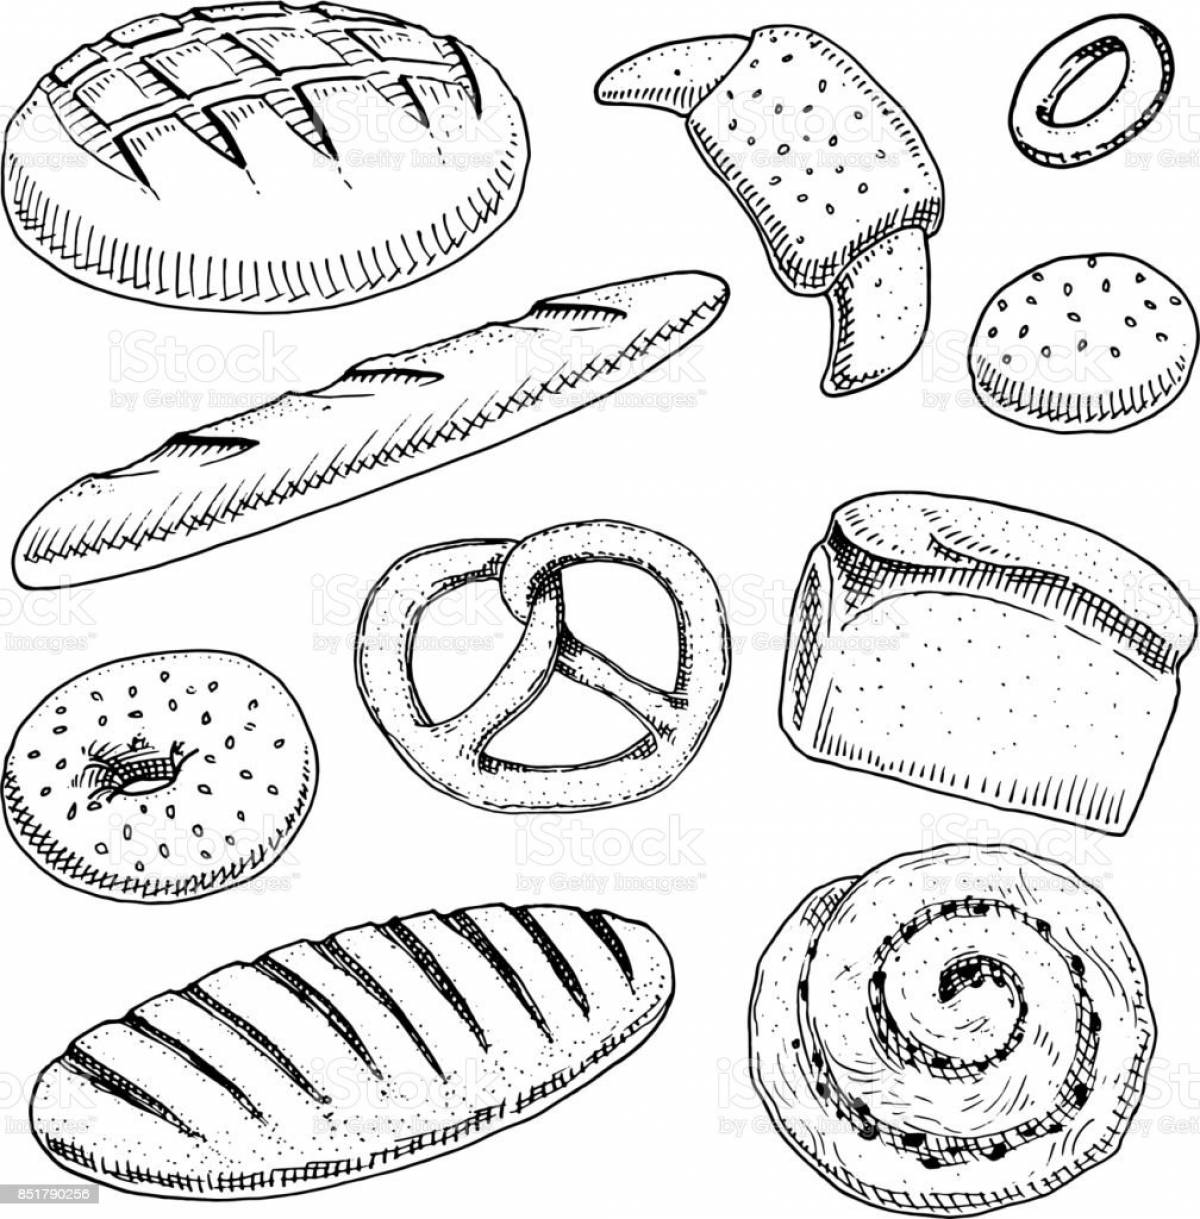 Coloring page unusual flour products